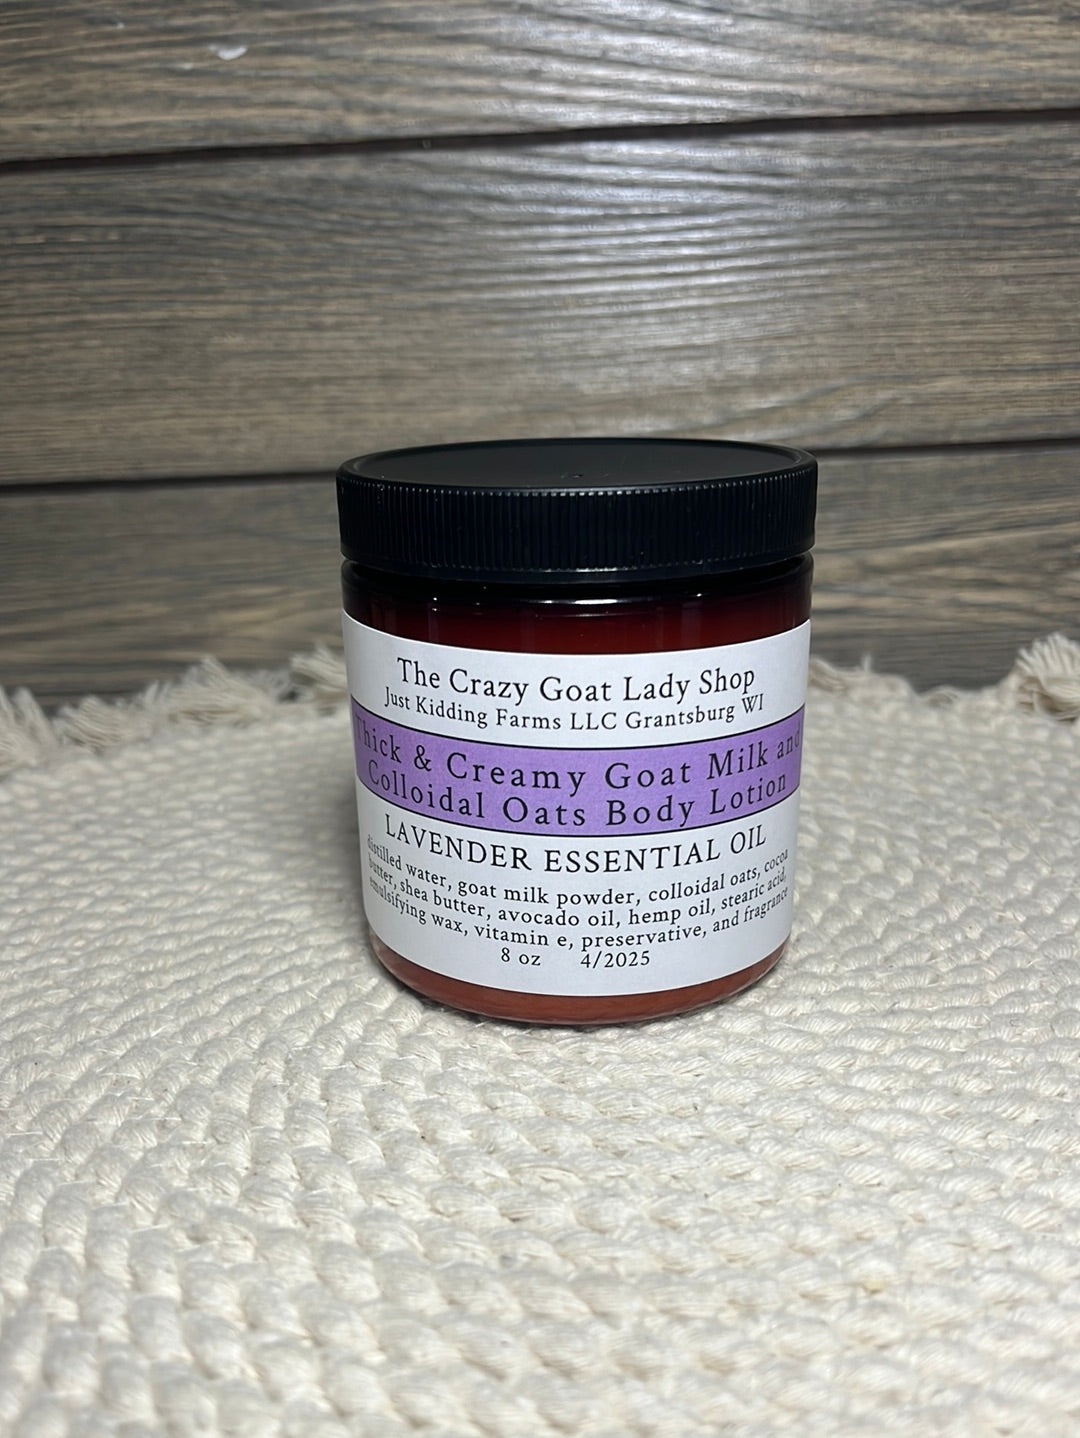 Thick & Creamy Goat Milk and Colloidal Oatmeal Body Lotion ~ LAVENDER ESSENTIAL OIL